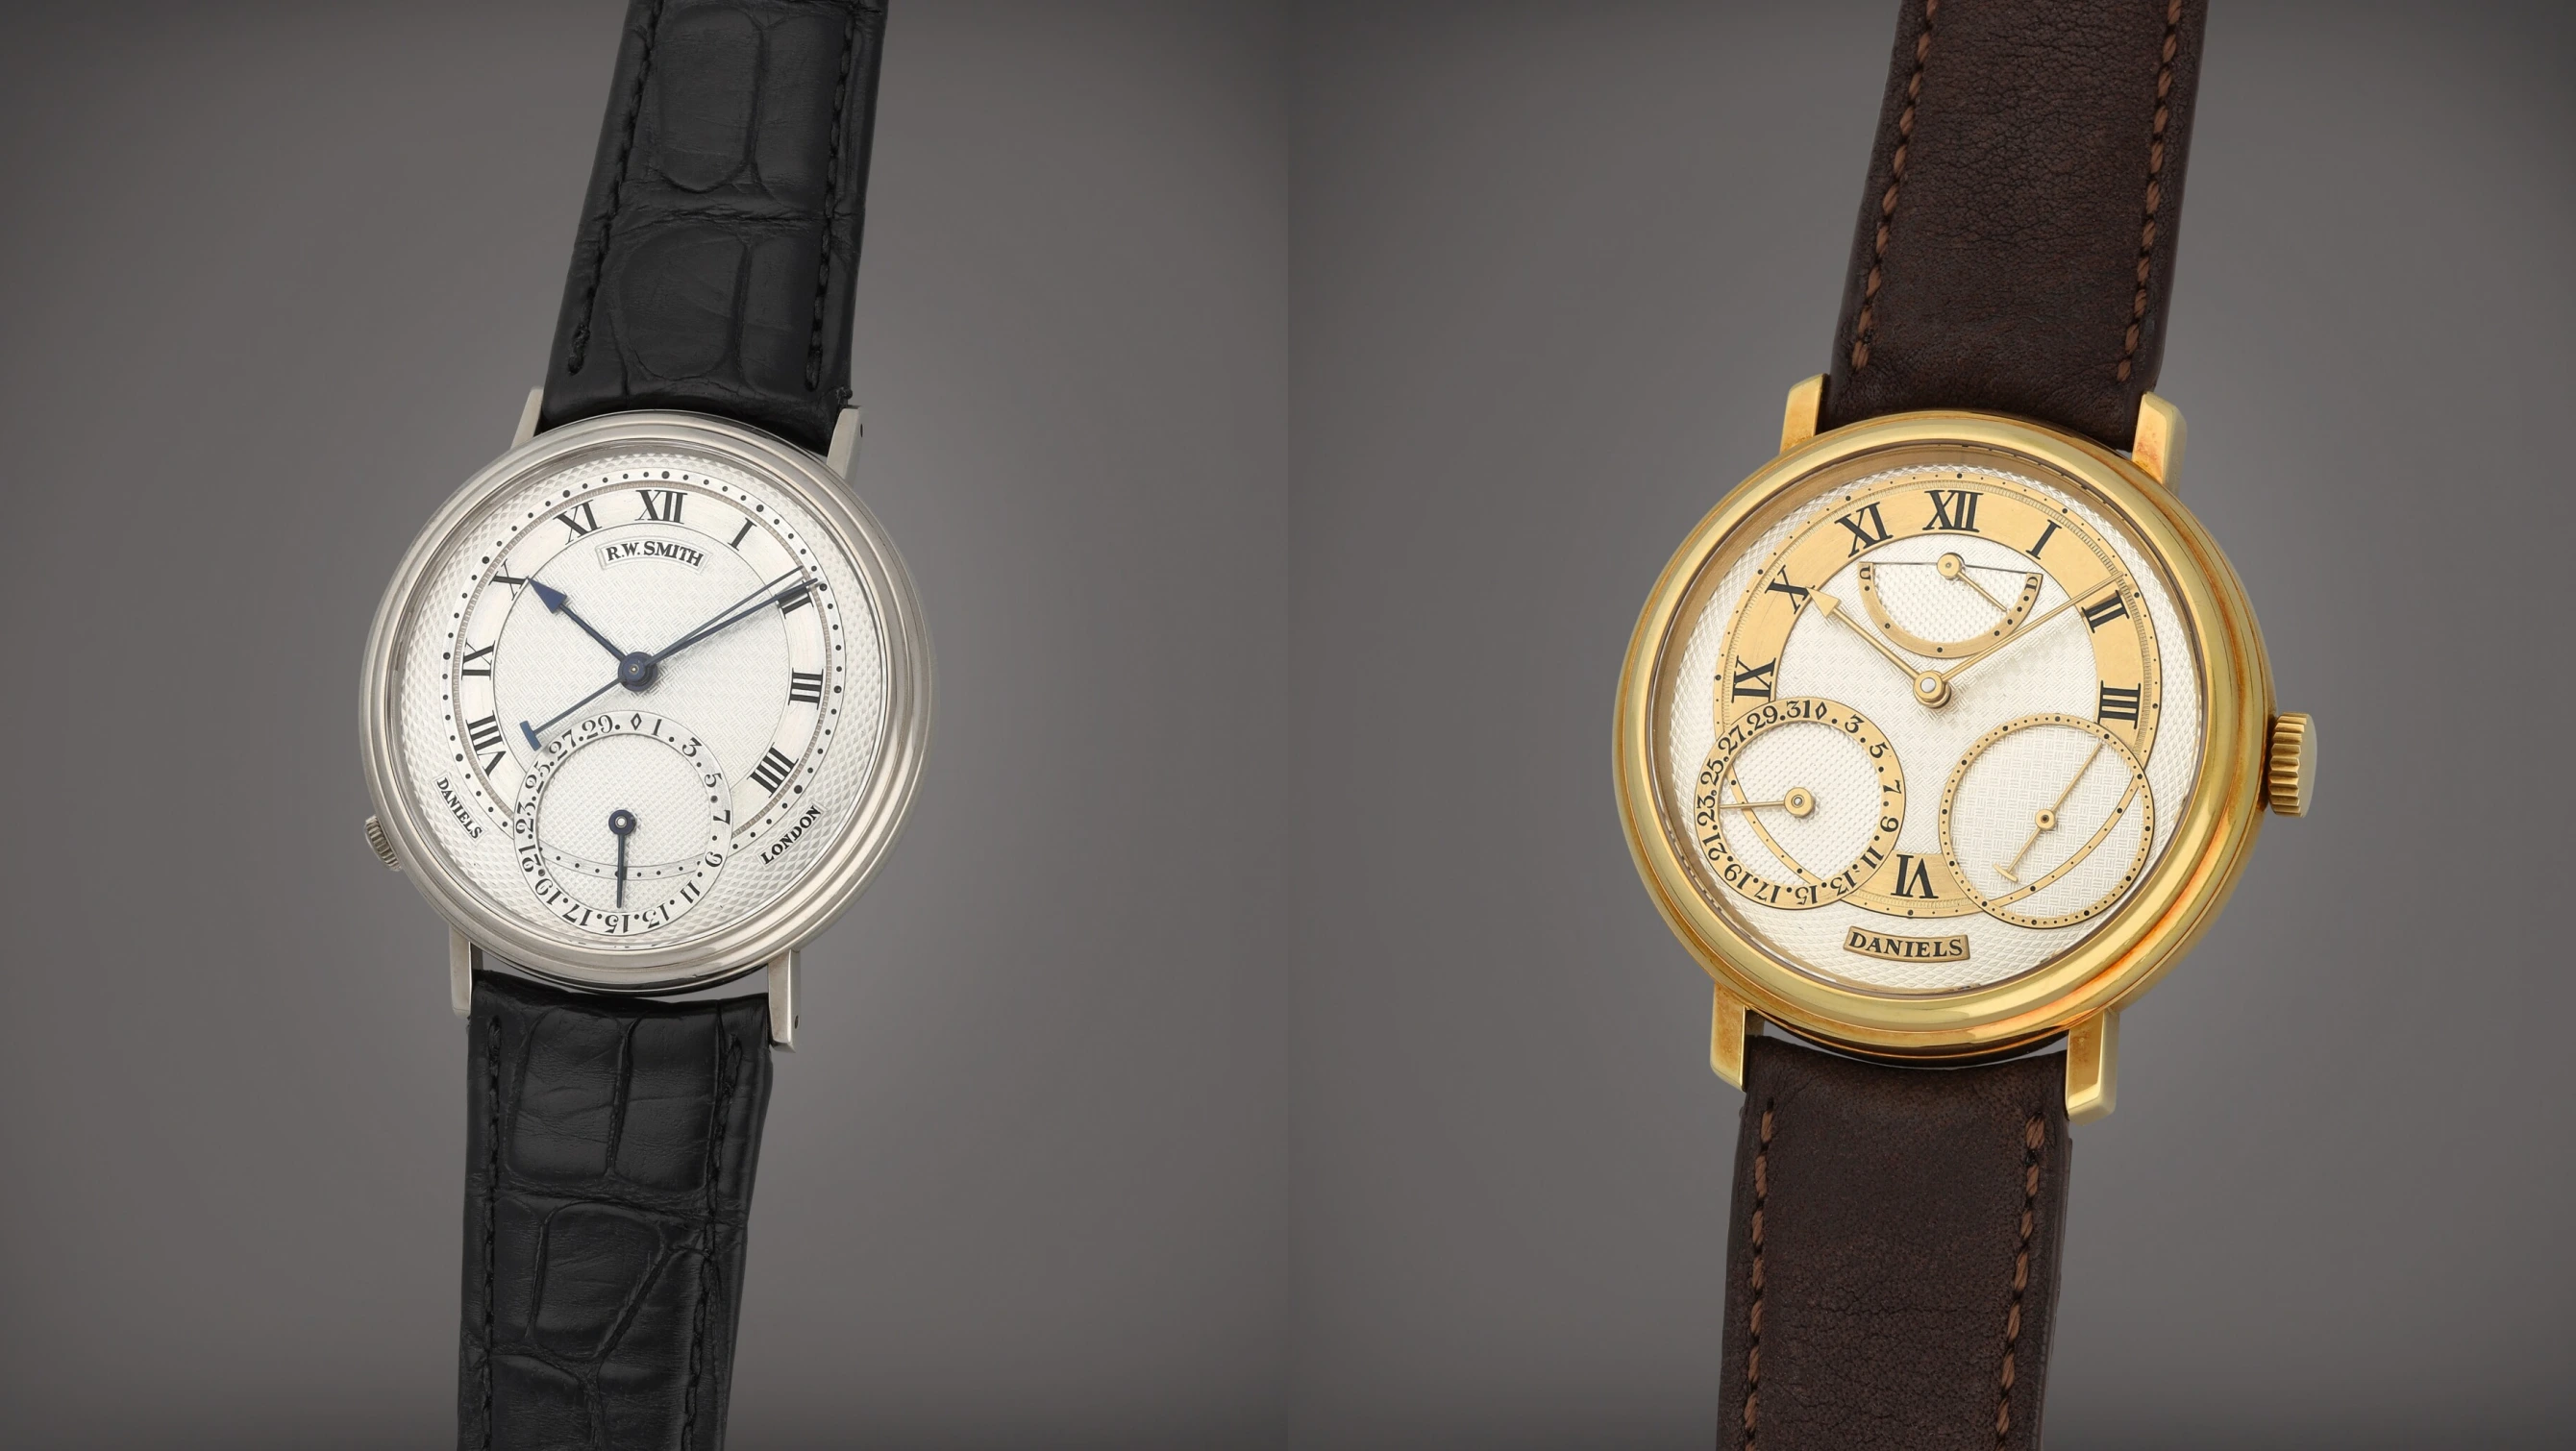 Sotheby’s sale of two George Daniels x Roger Smith watches had a record-breaking result